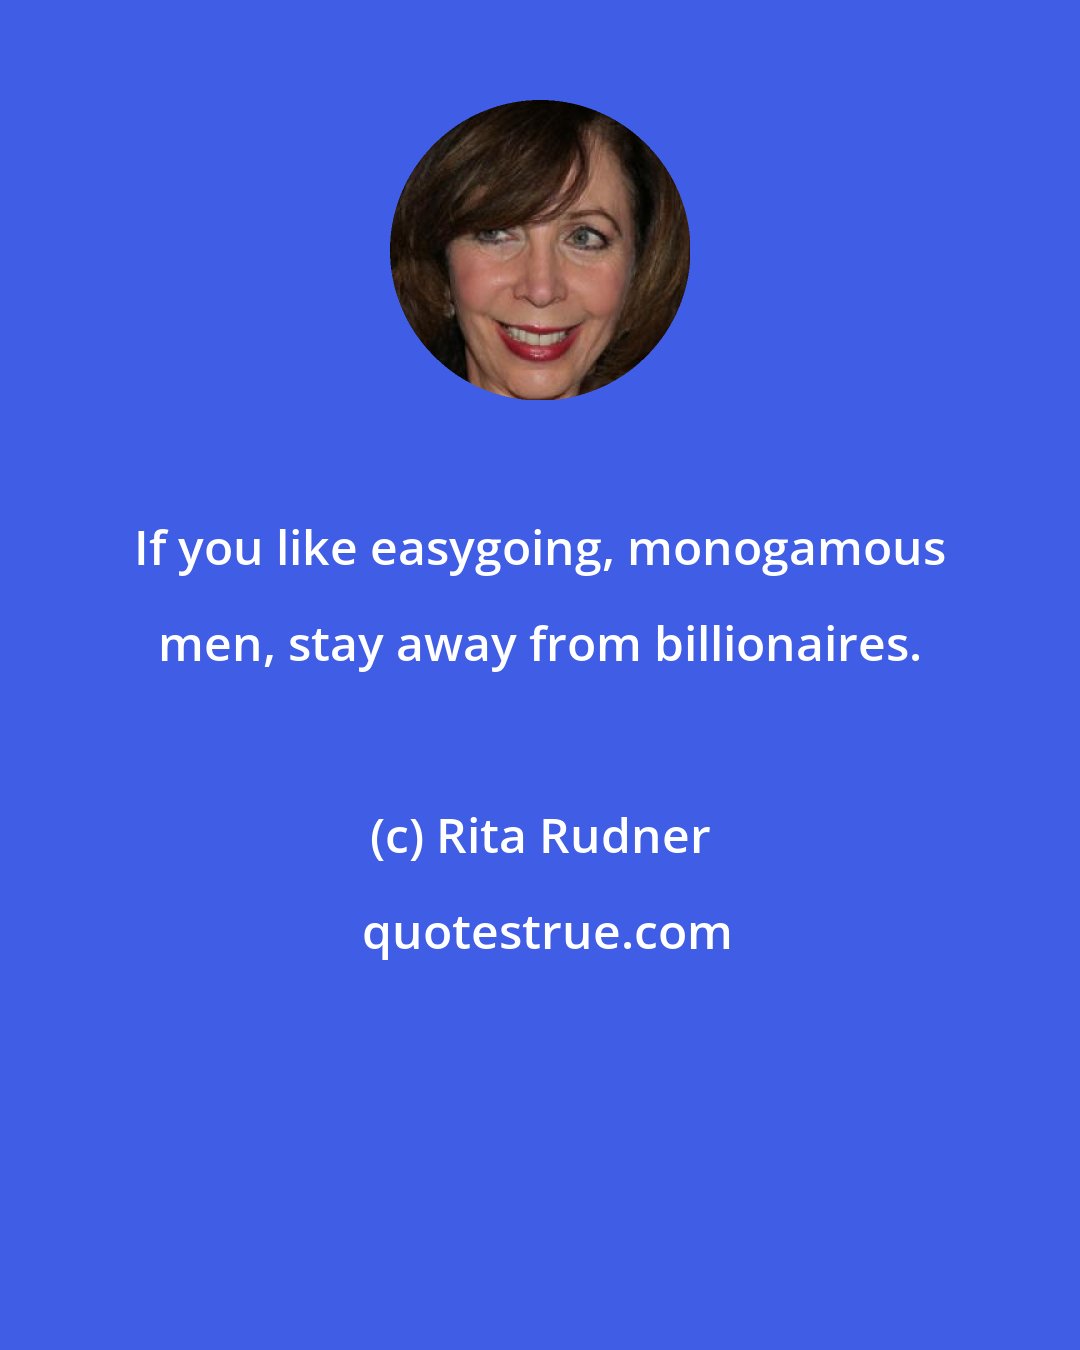 Rita Rudner: If you like easygoing, monogamous men, stay away from billionaires.